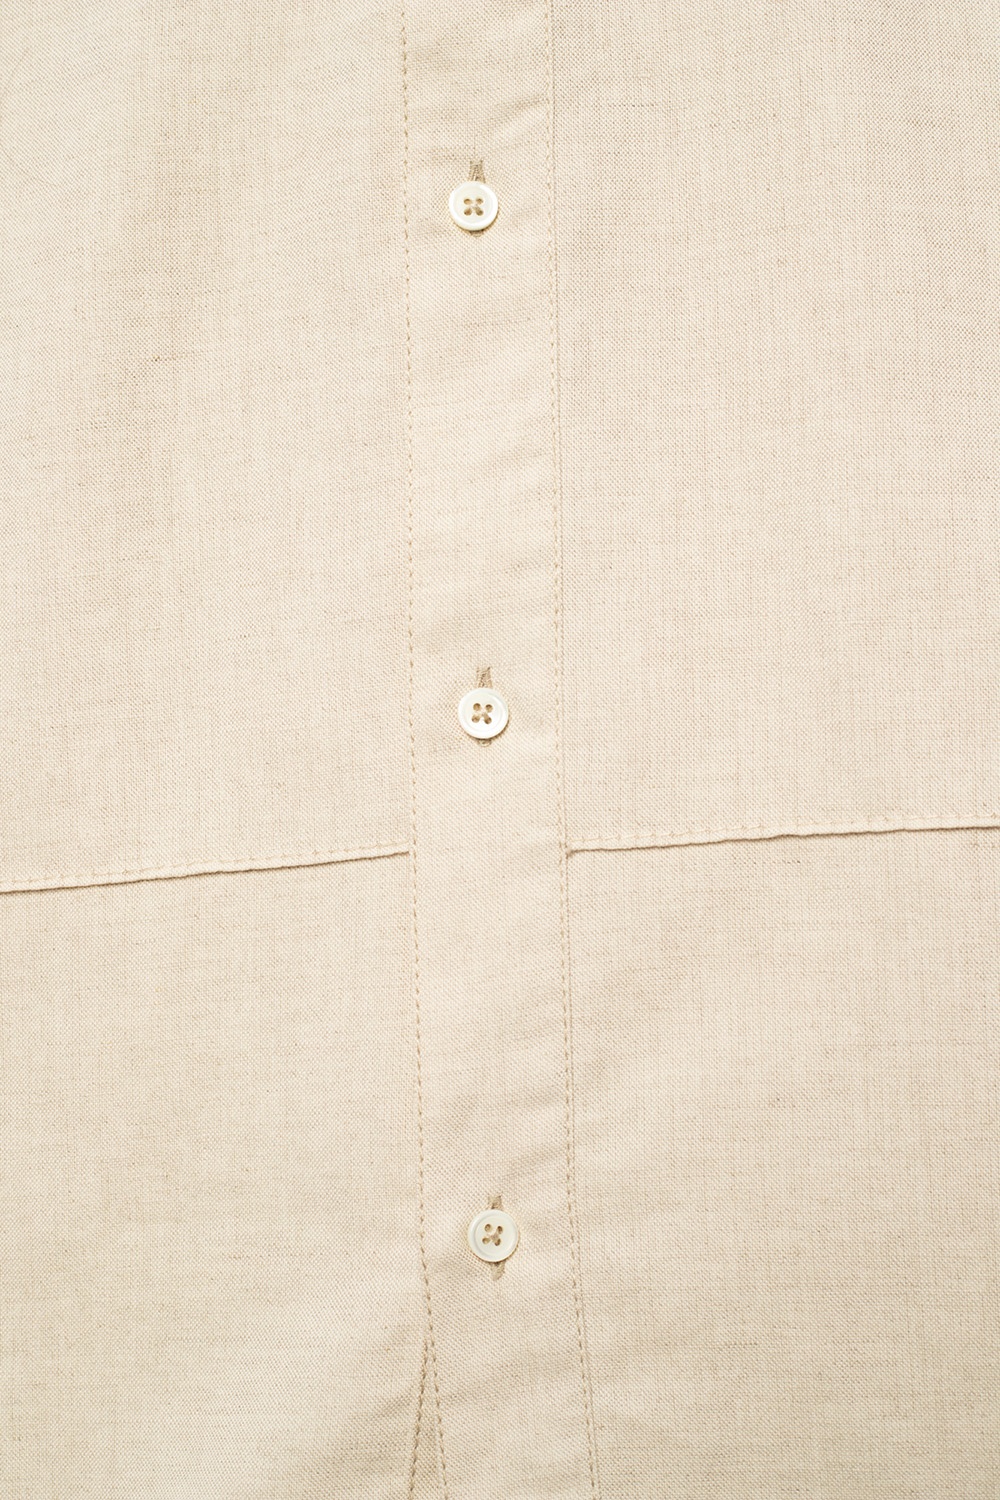 Jacquemus ‘Carro’ shirt with stitching details